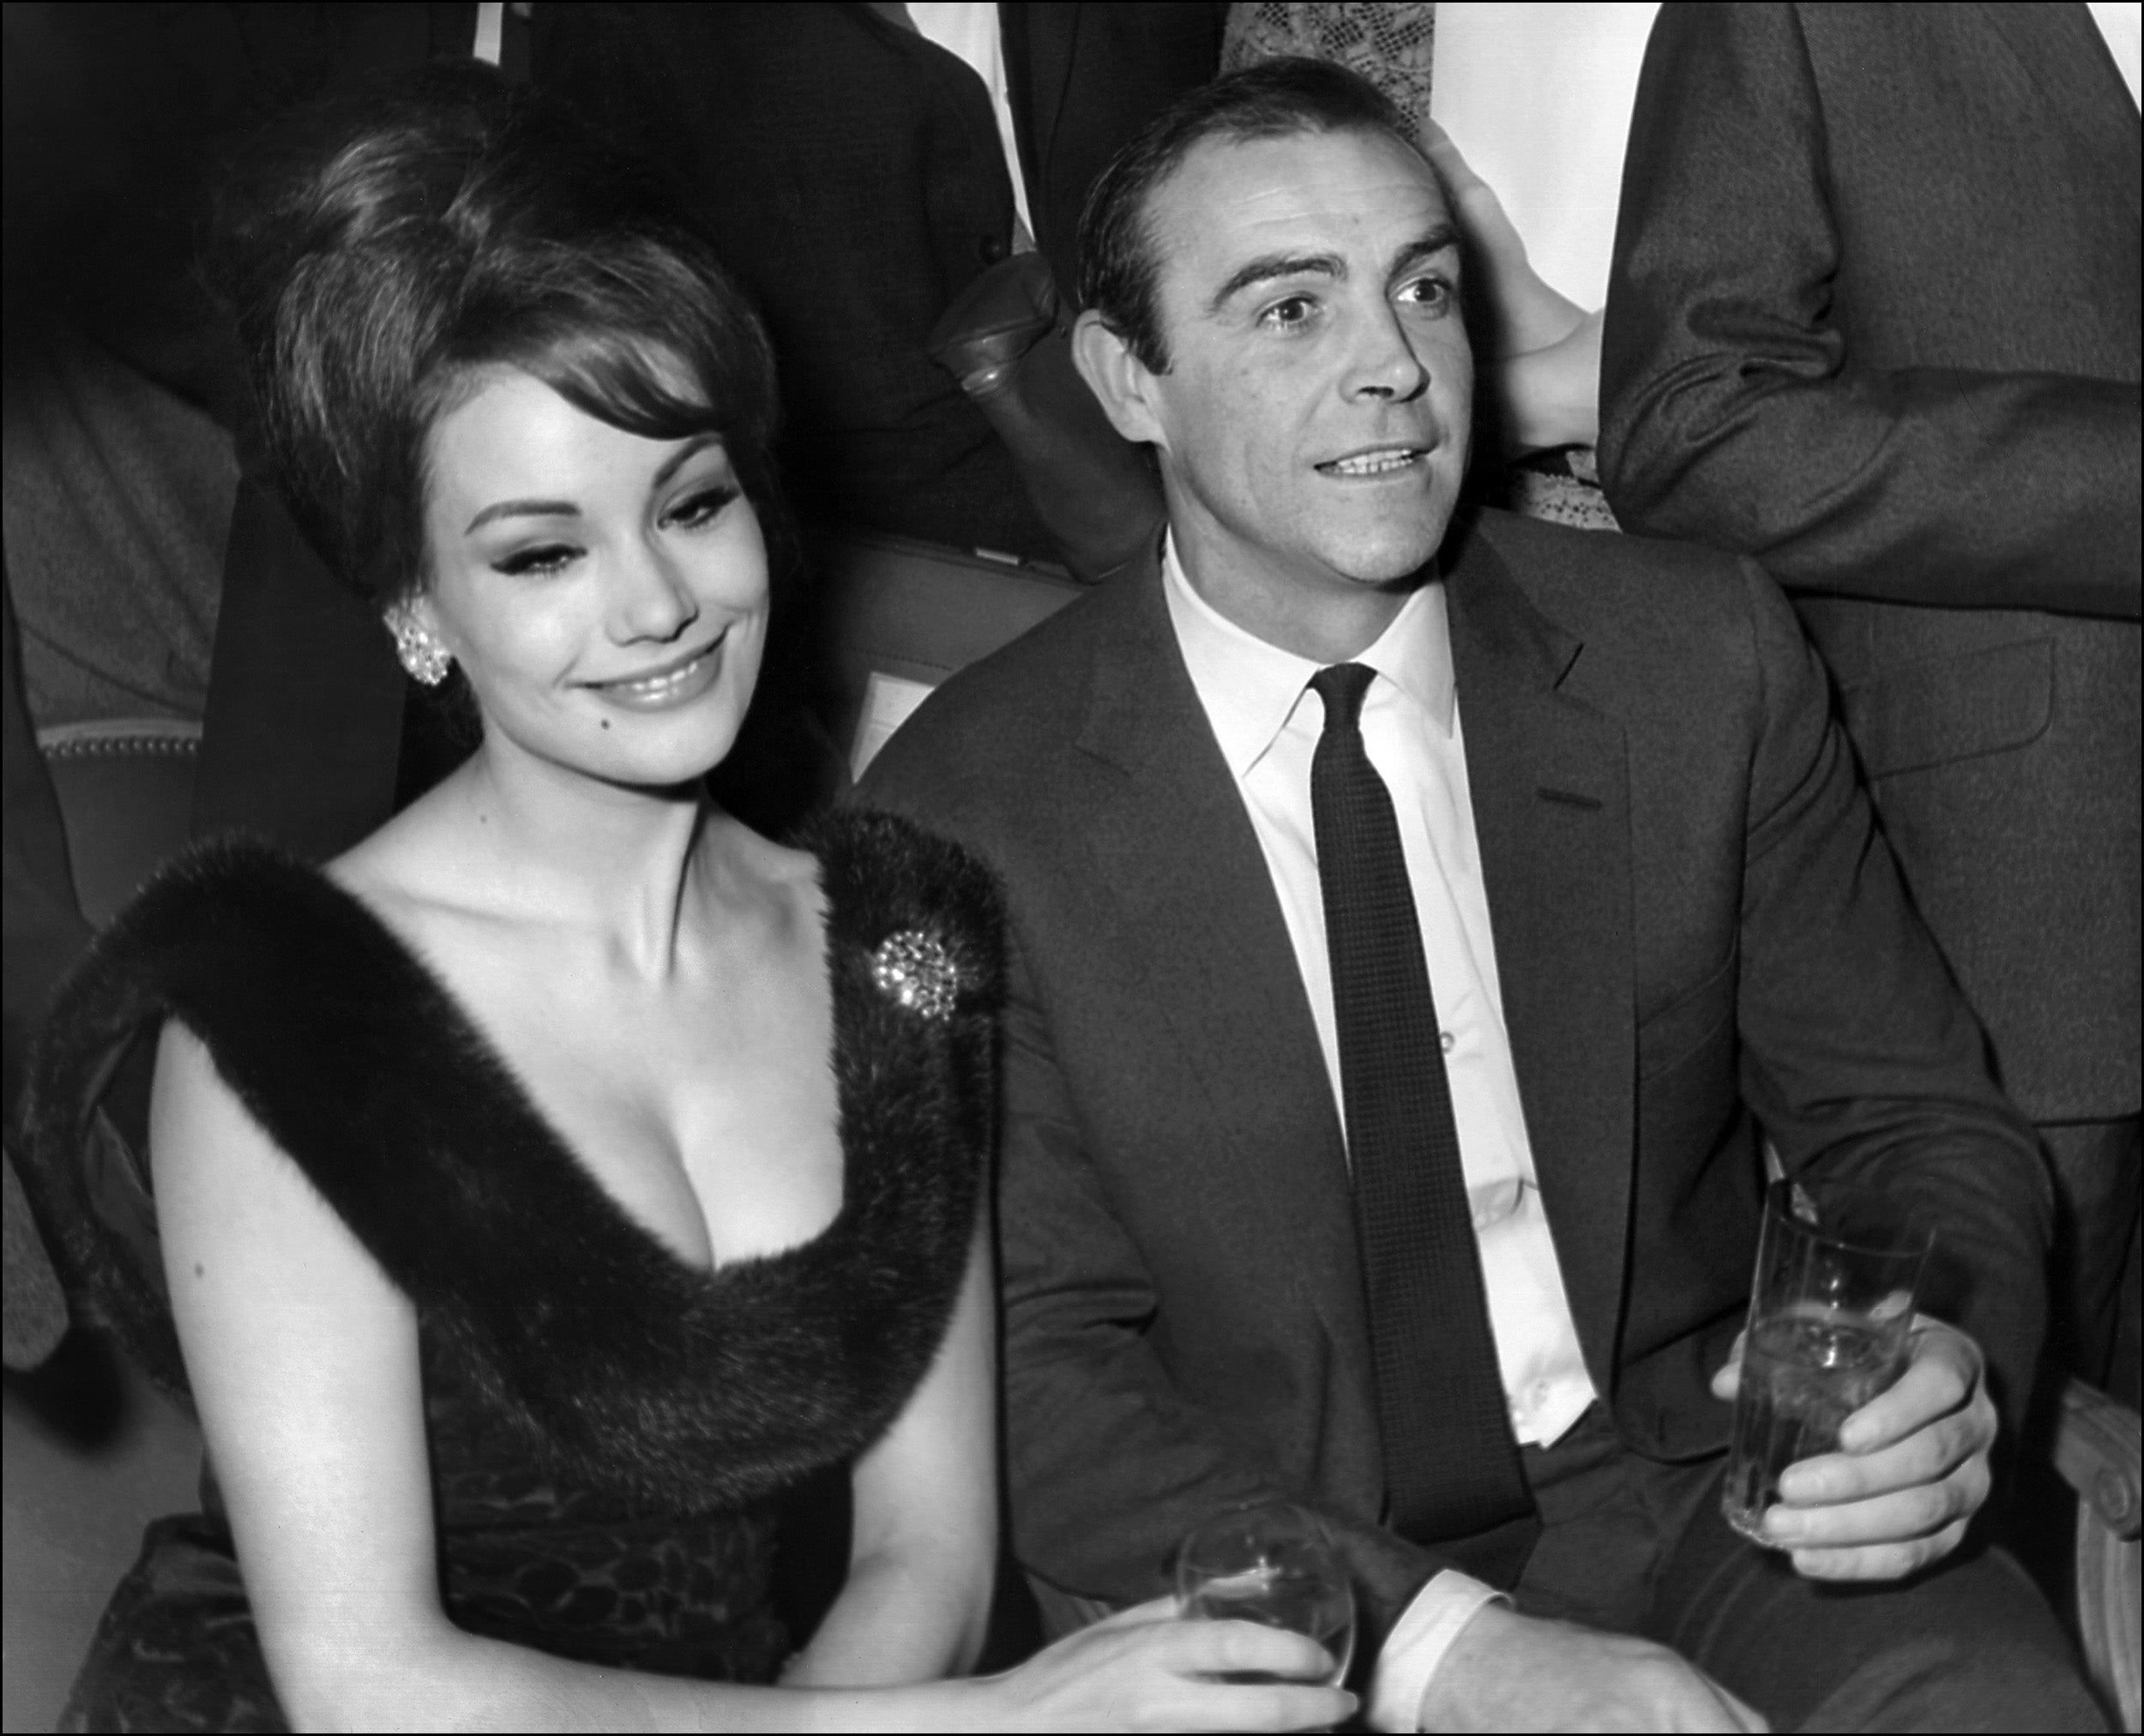 Claudine Auger with co-star Sean Connery at a press conference for 'Thunderball' in Paris, 1965